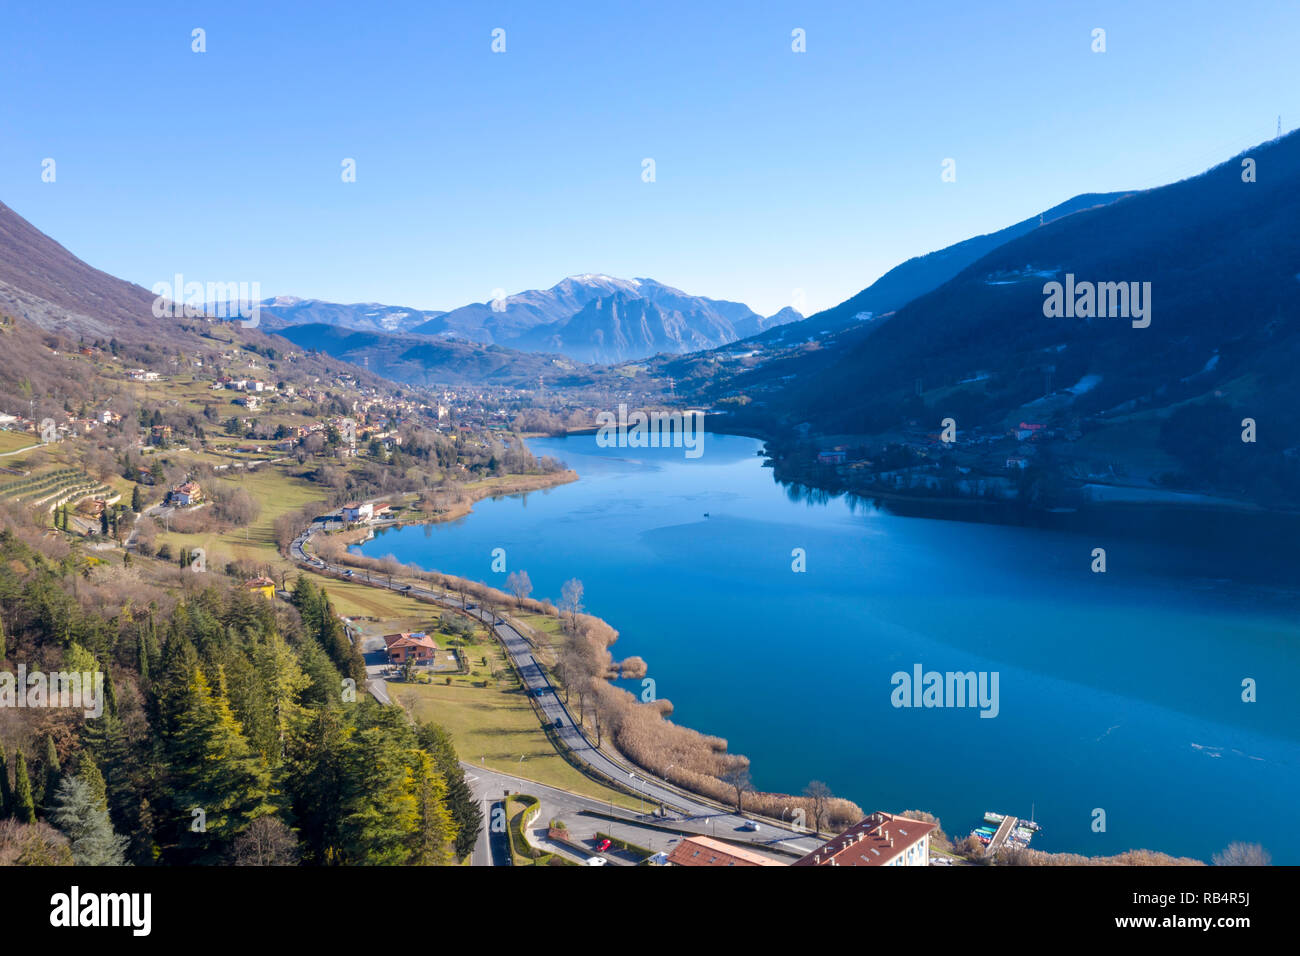 mountains rivers lakes and clear skies, Italy beautiful landscapes Stock Photo